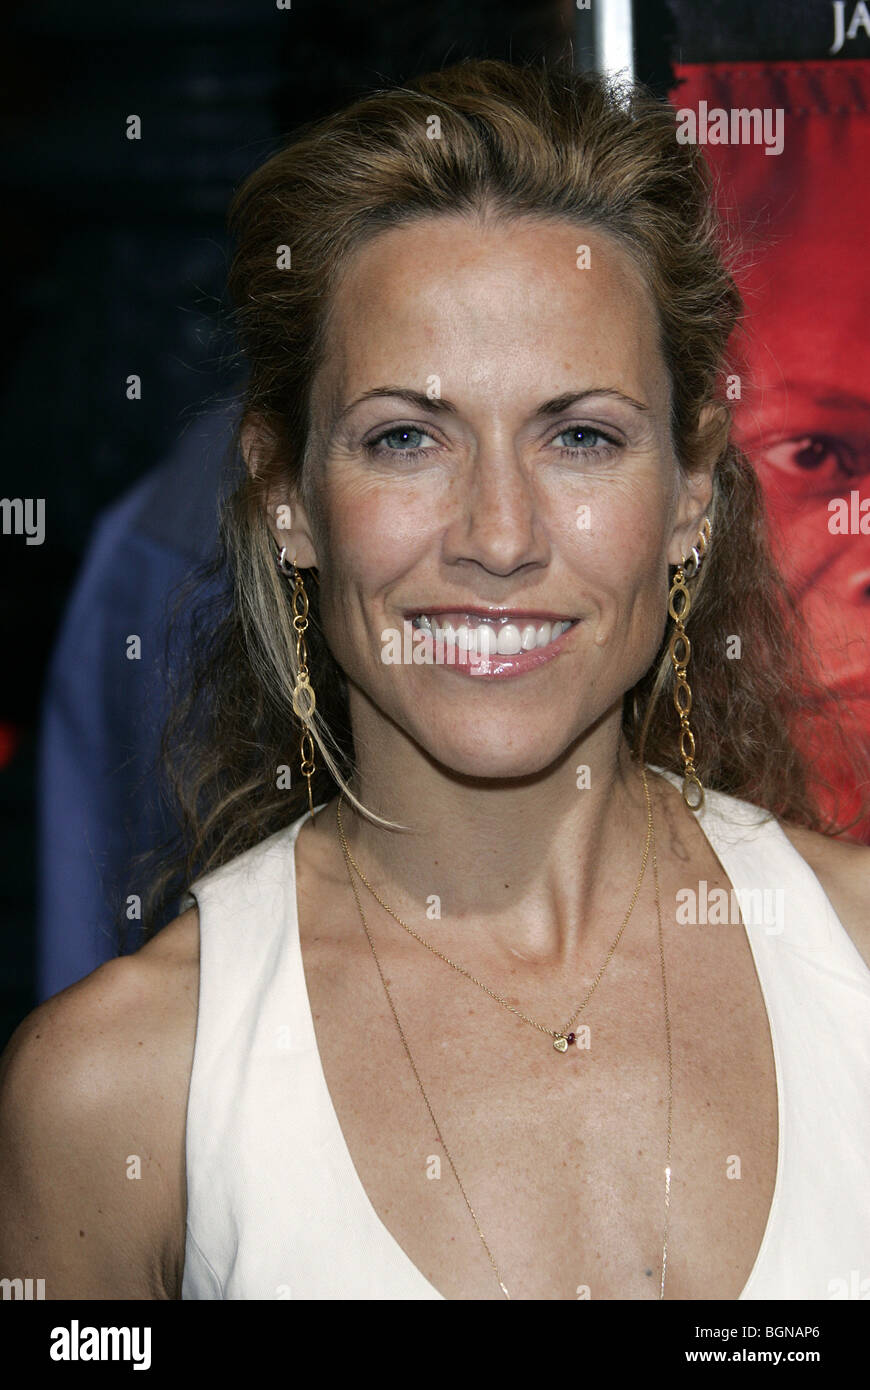 SHERYL CROW HOME OF THE BRAVE WORLD PREMIERE BEVERLY HILLS LOS ANGELES USA  05 December 2006 Stock Photo - Alamy